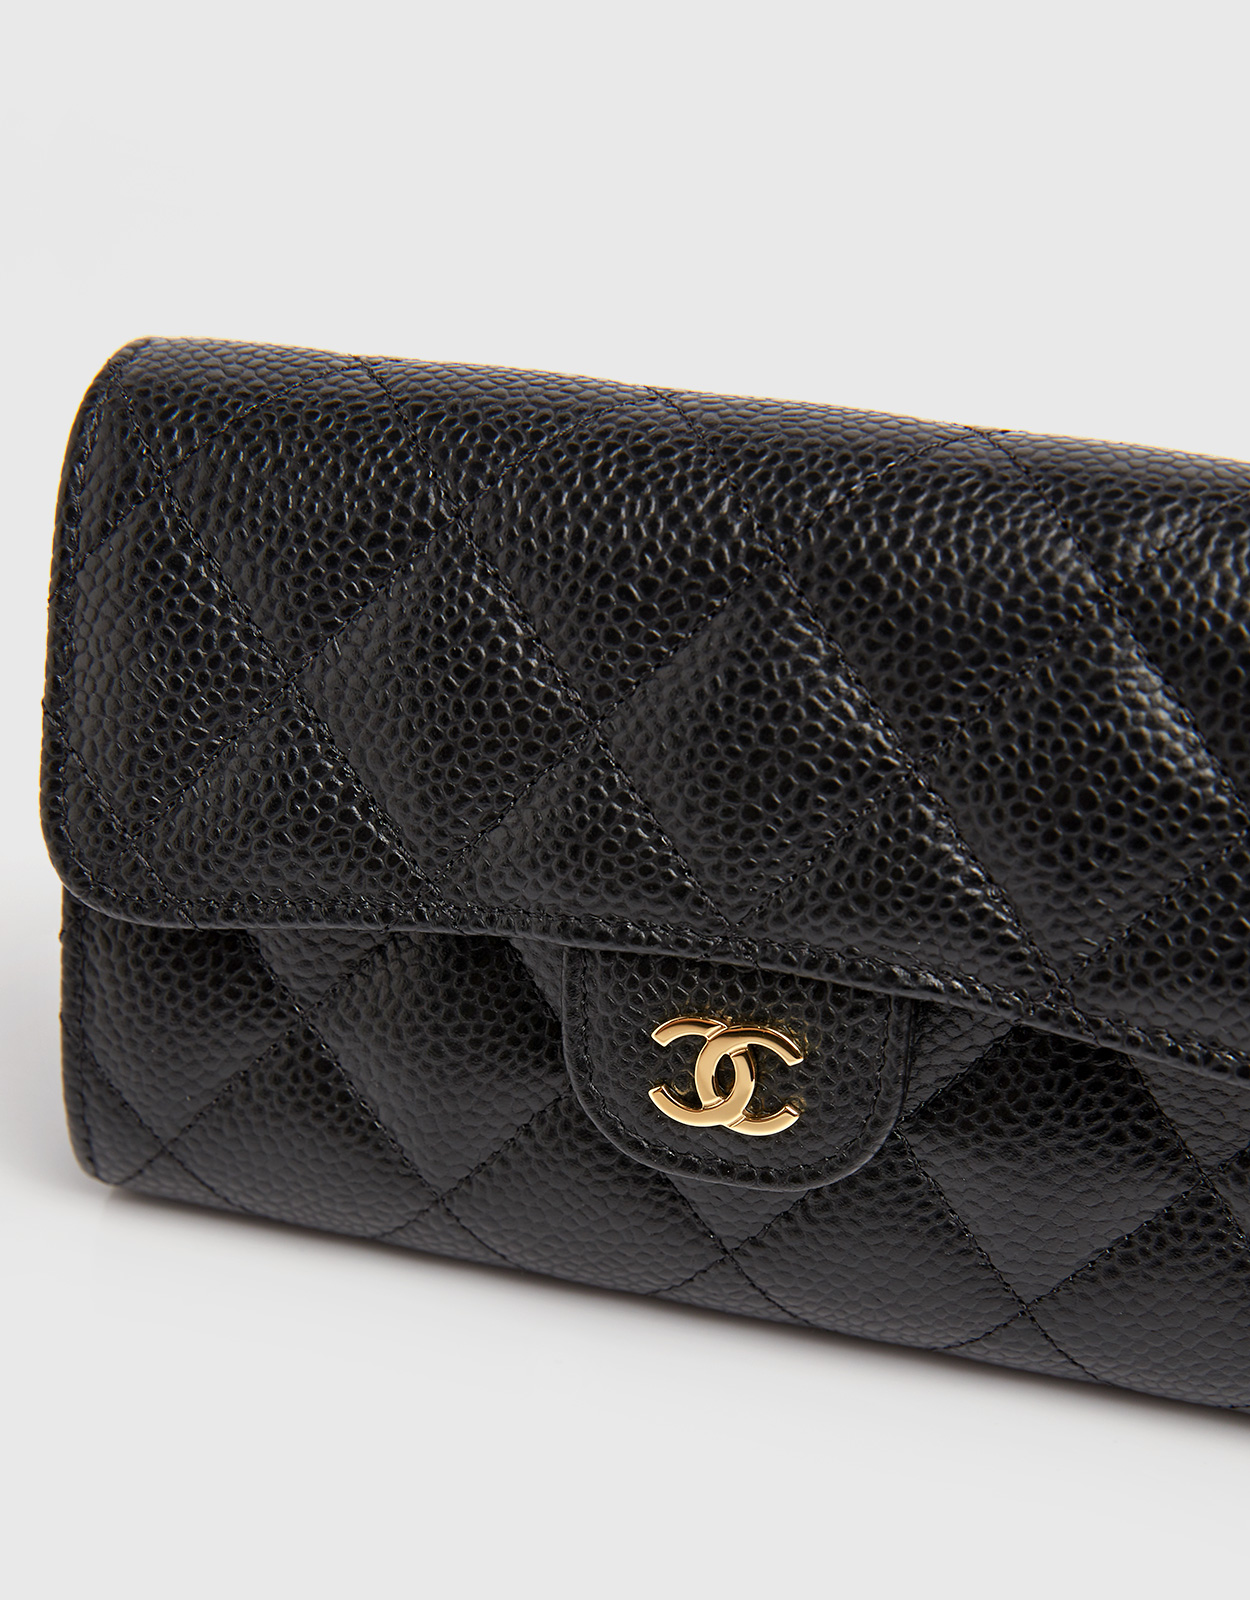 Chanel Classic Medium Flap Wallet In Grained Calfskin With Gold Hardware ( Wallets and Small Leather Goods,Wallets)